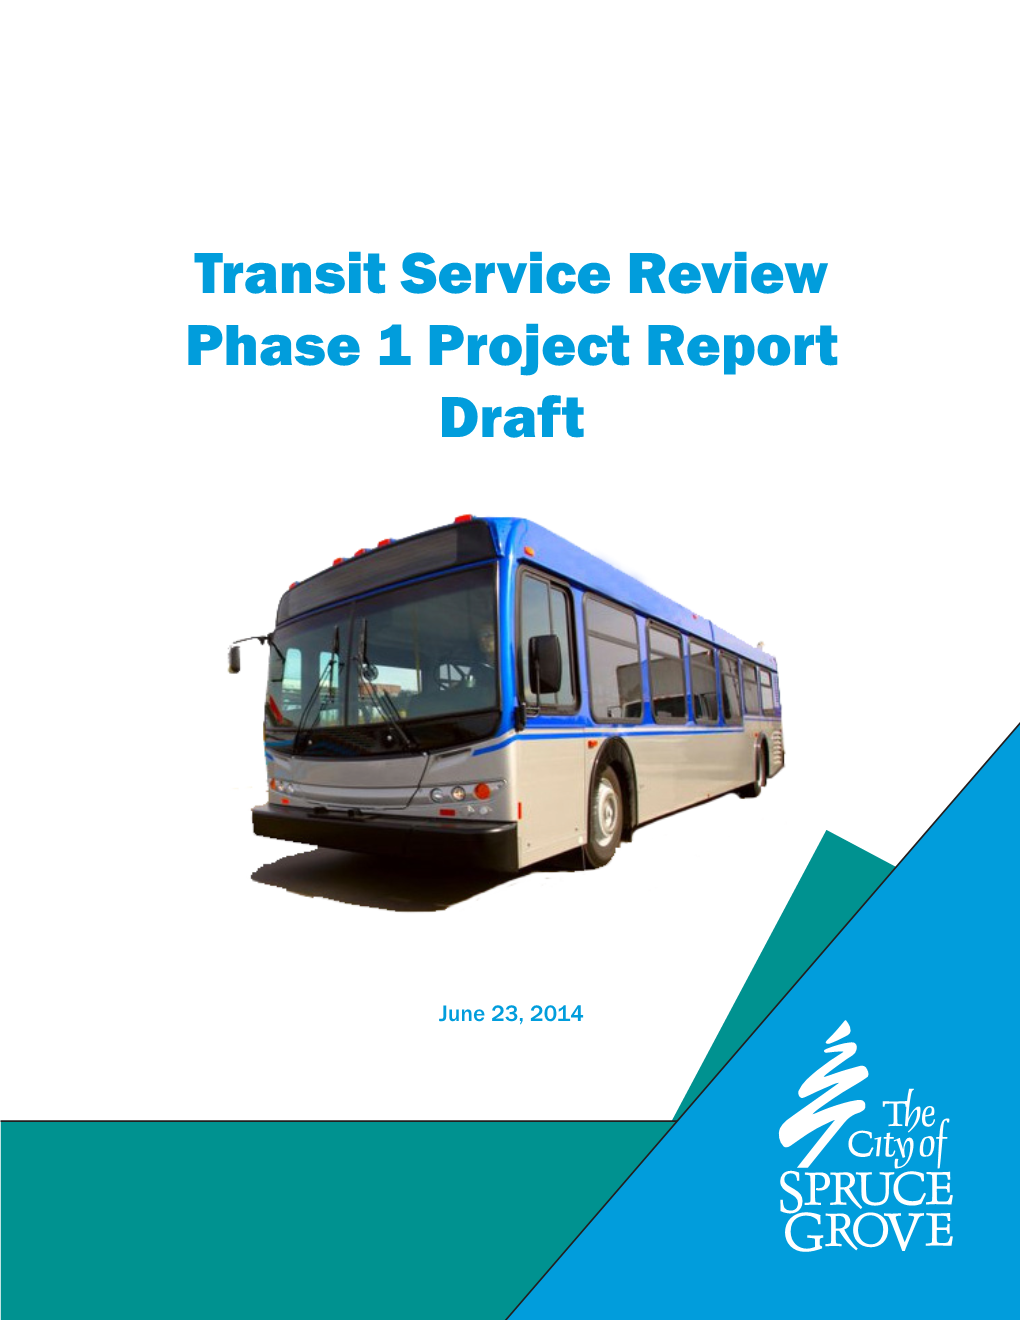 Transit Service Review Phase 1 Project Report Draft